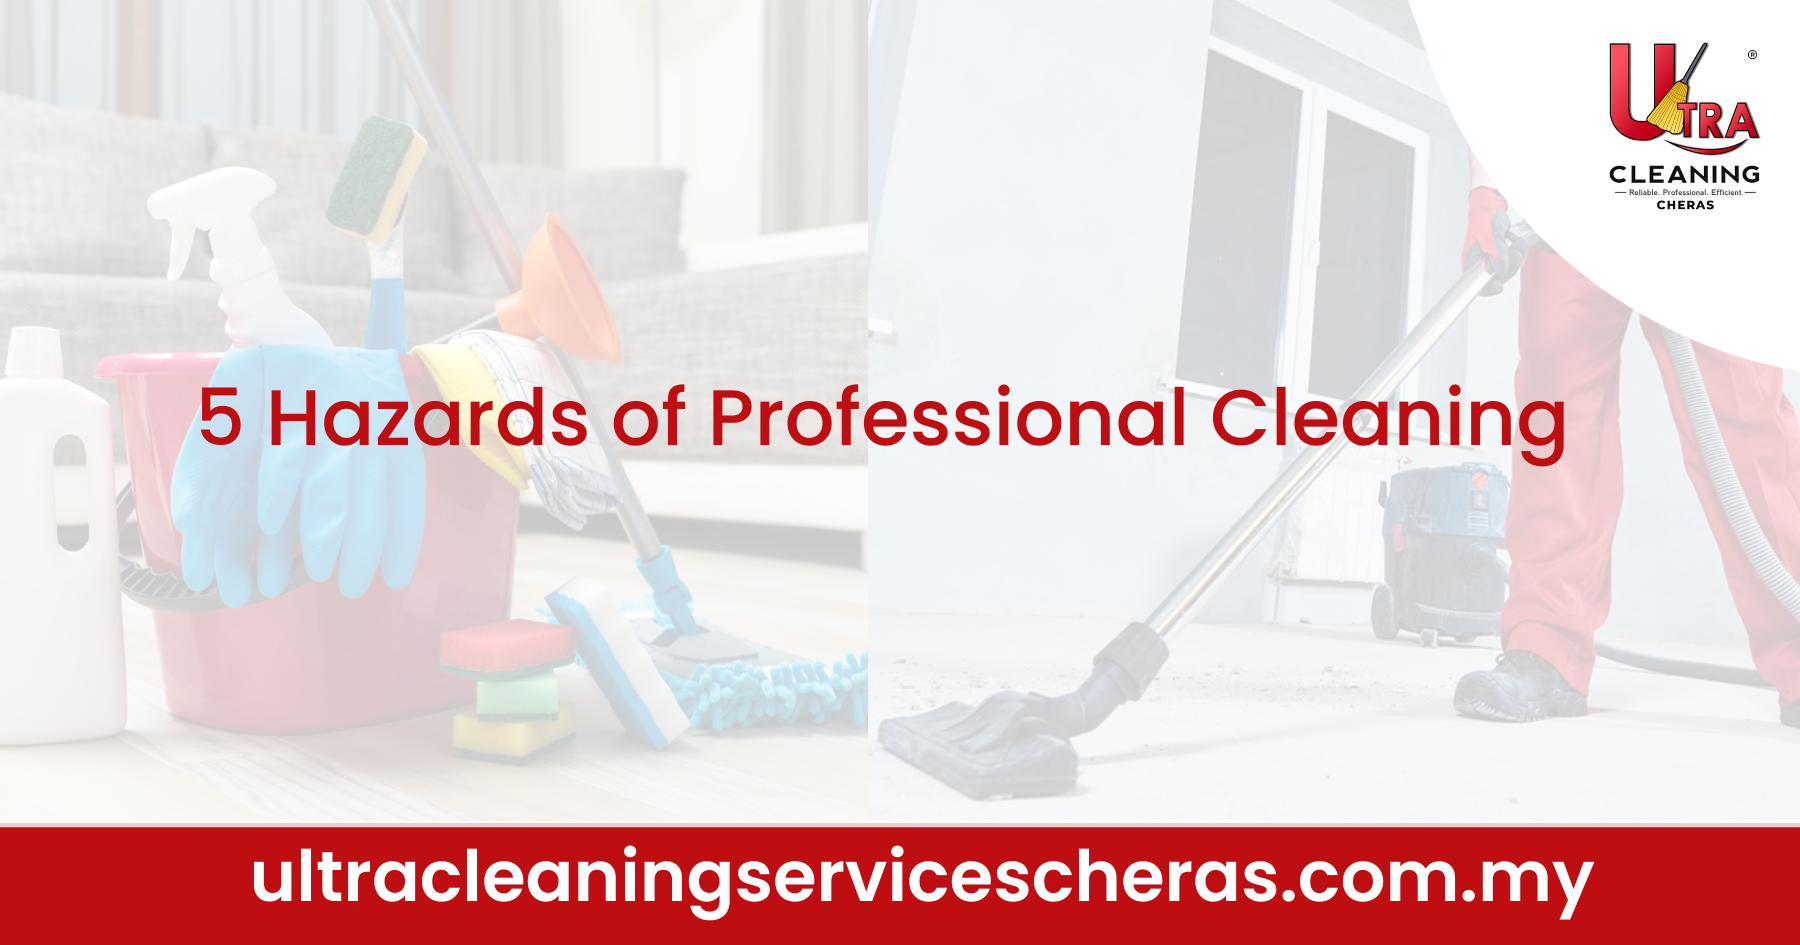 5 Hazards of Professional Cleaning